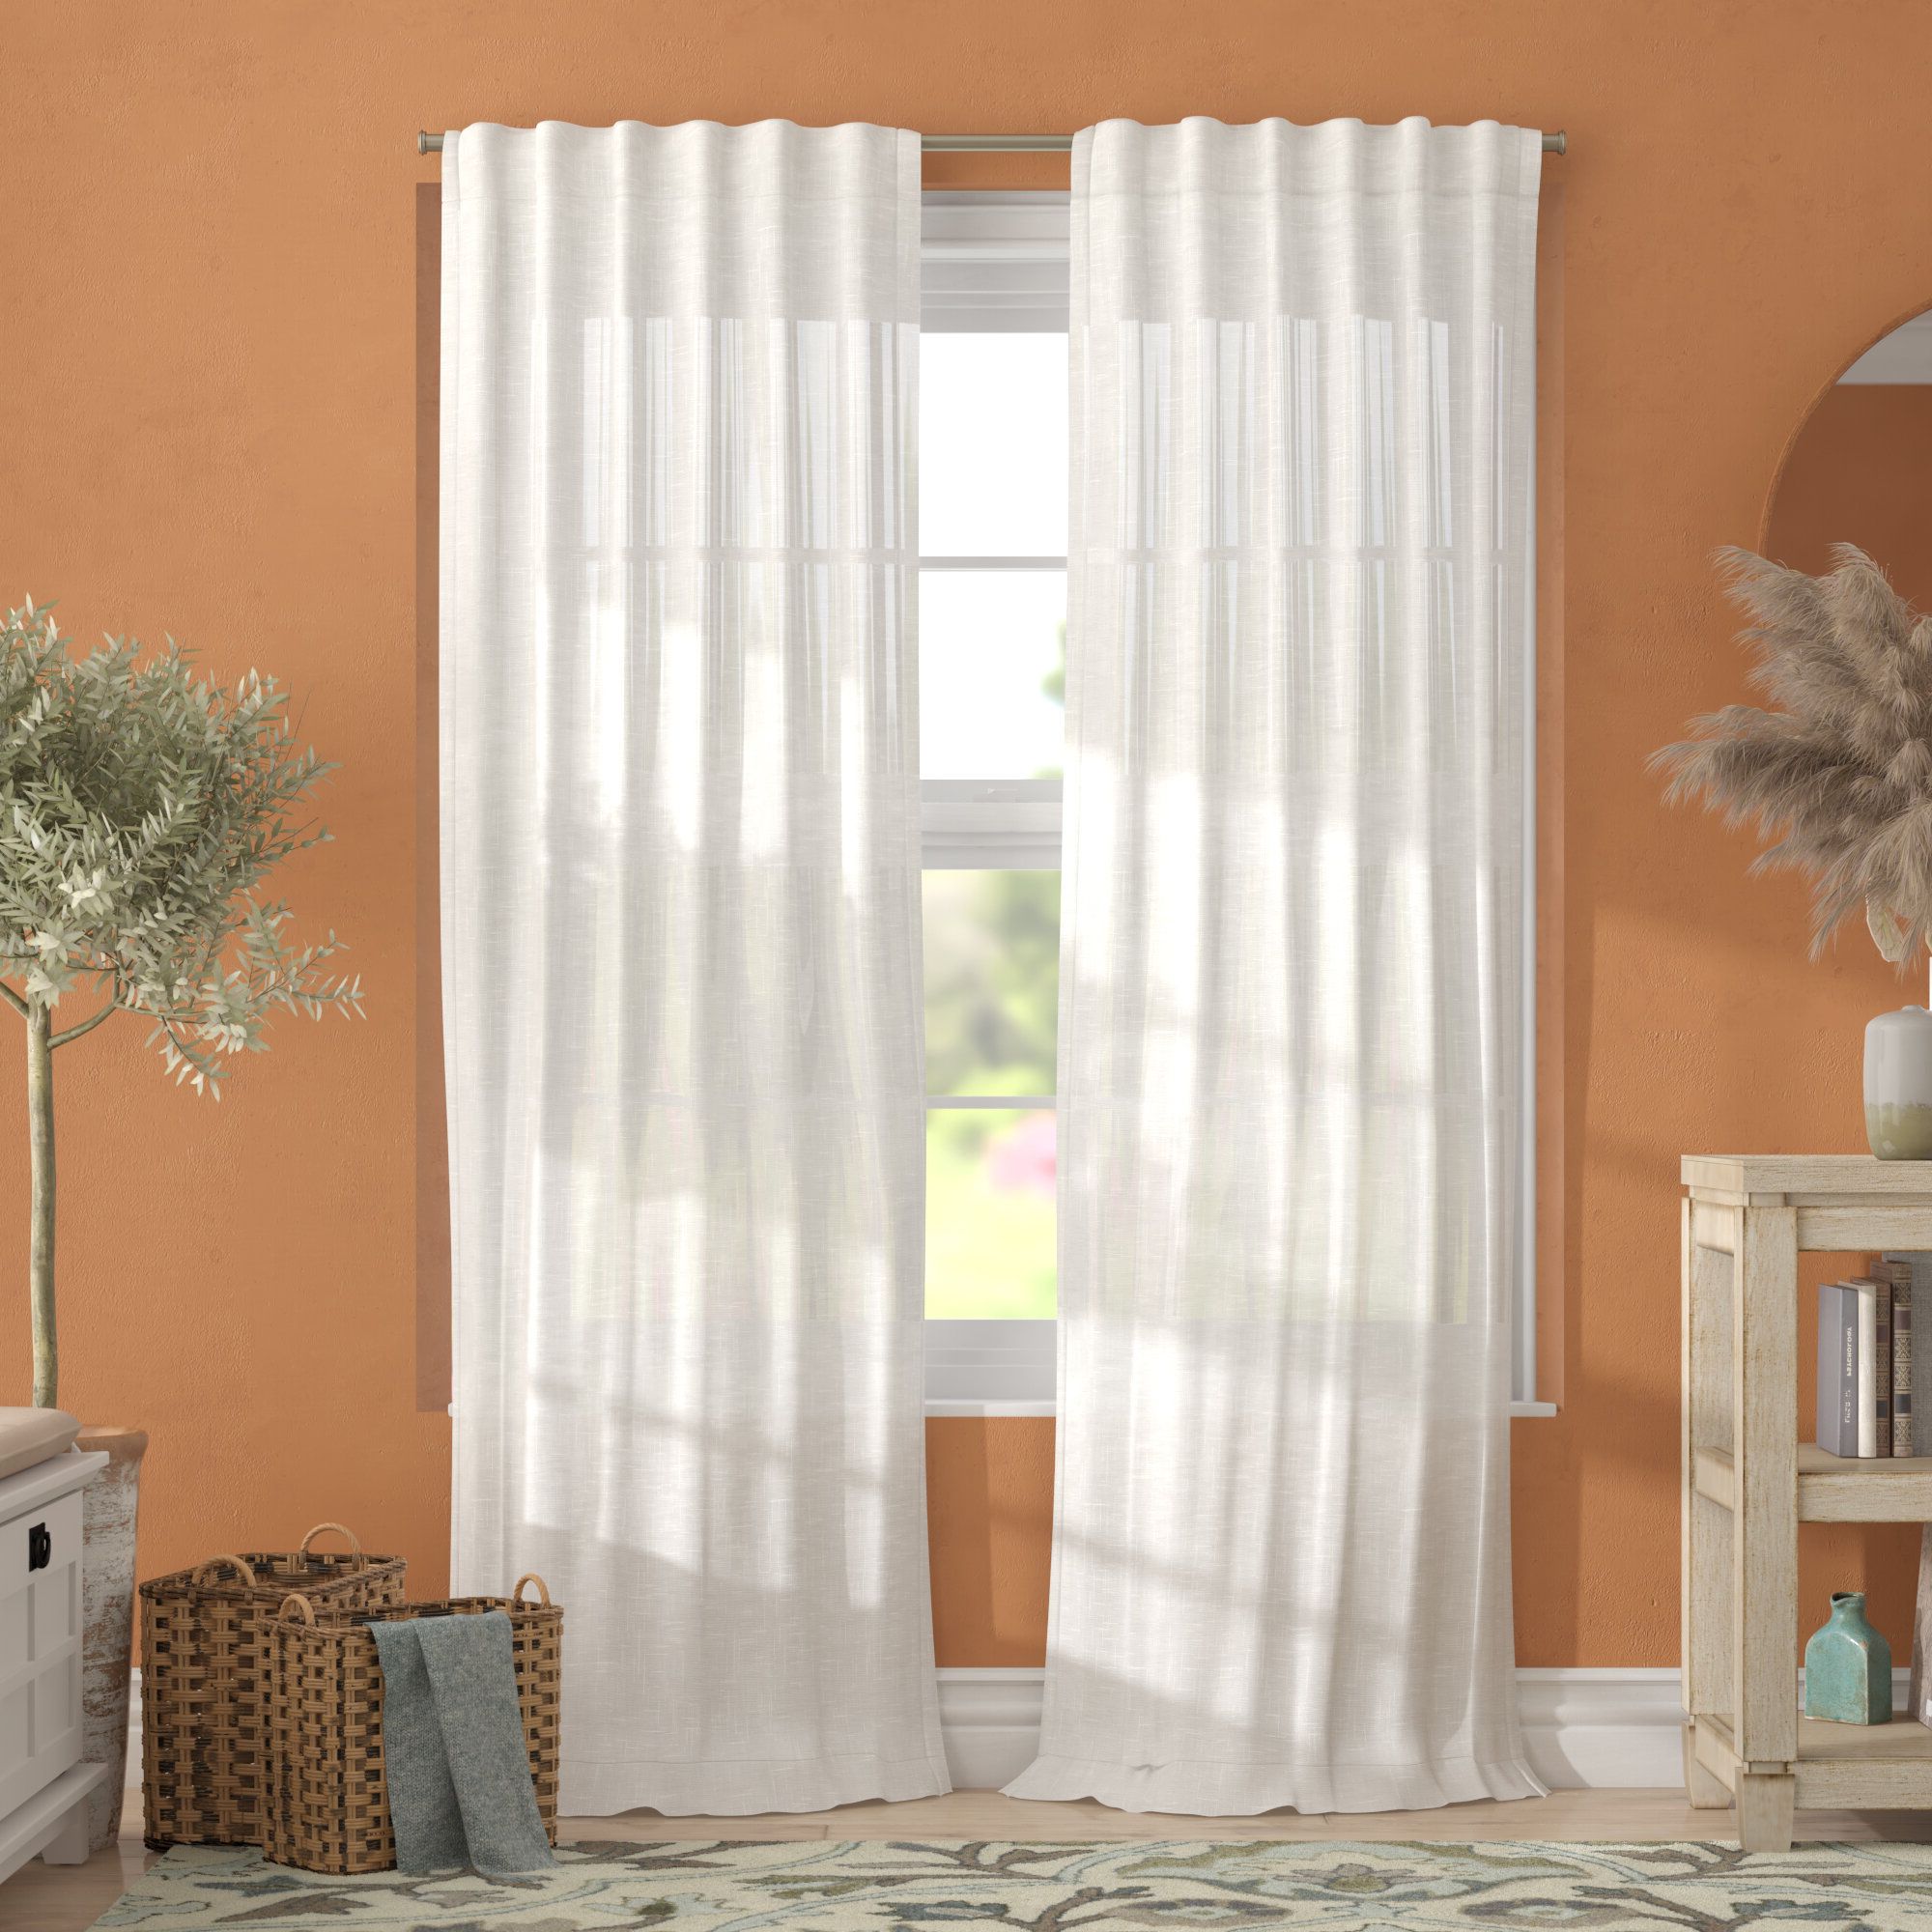 Alcott Hill Leon Solid Sheer Tab Top Curtain Panels Pertaining To 2021 Vue Elements Priya Tab Top Window Curtains (View 19 of 20)